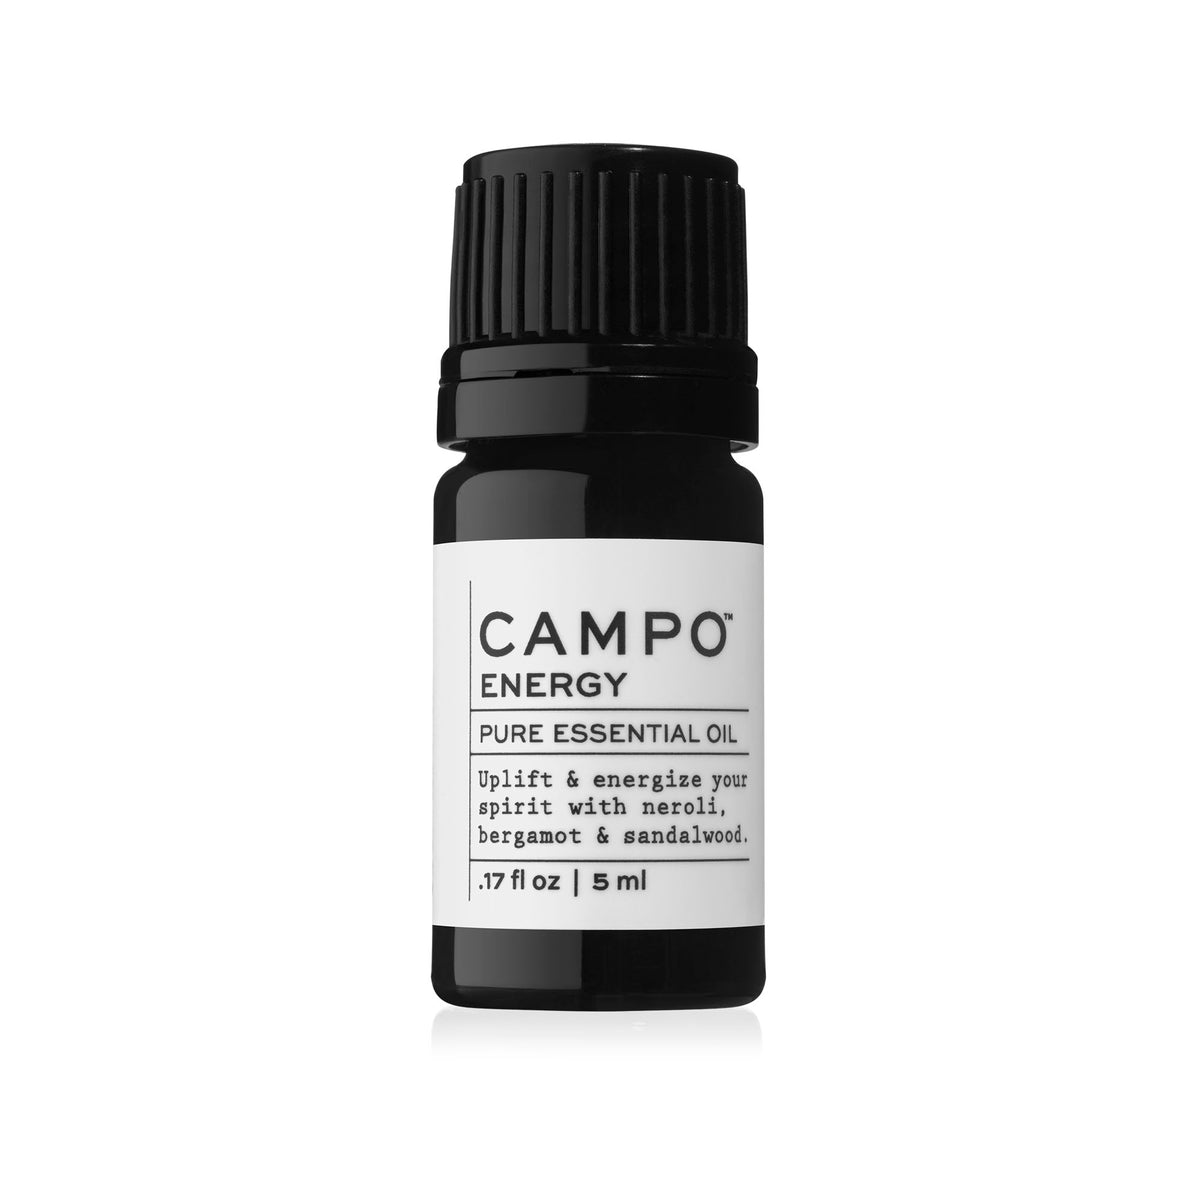 Campo Beauty ENERGY Blend 5 ml Essential Oil. Restores a sense of vitality and alertness. An uplifting blend of 100% pure essential oils with rich citrus notes of Italian Neroli Orange Blossom, Bergamot, Sweet Orange, and Bitter Orange with a hint of Australian Sandalwood. Feel the energy inside and out.